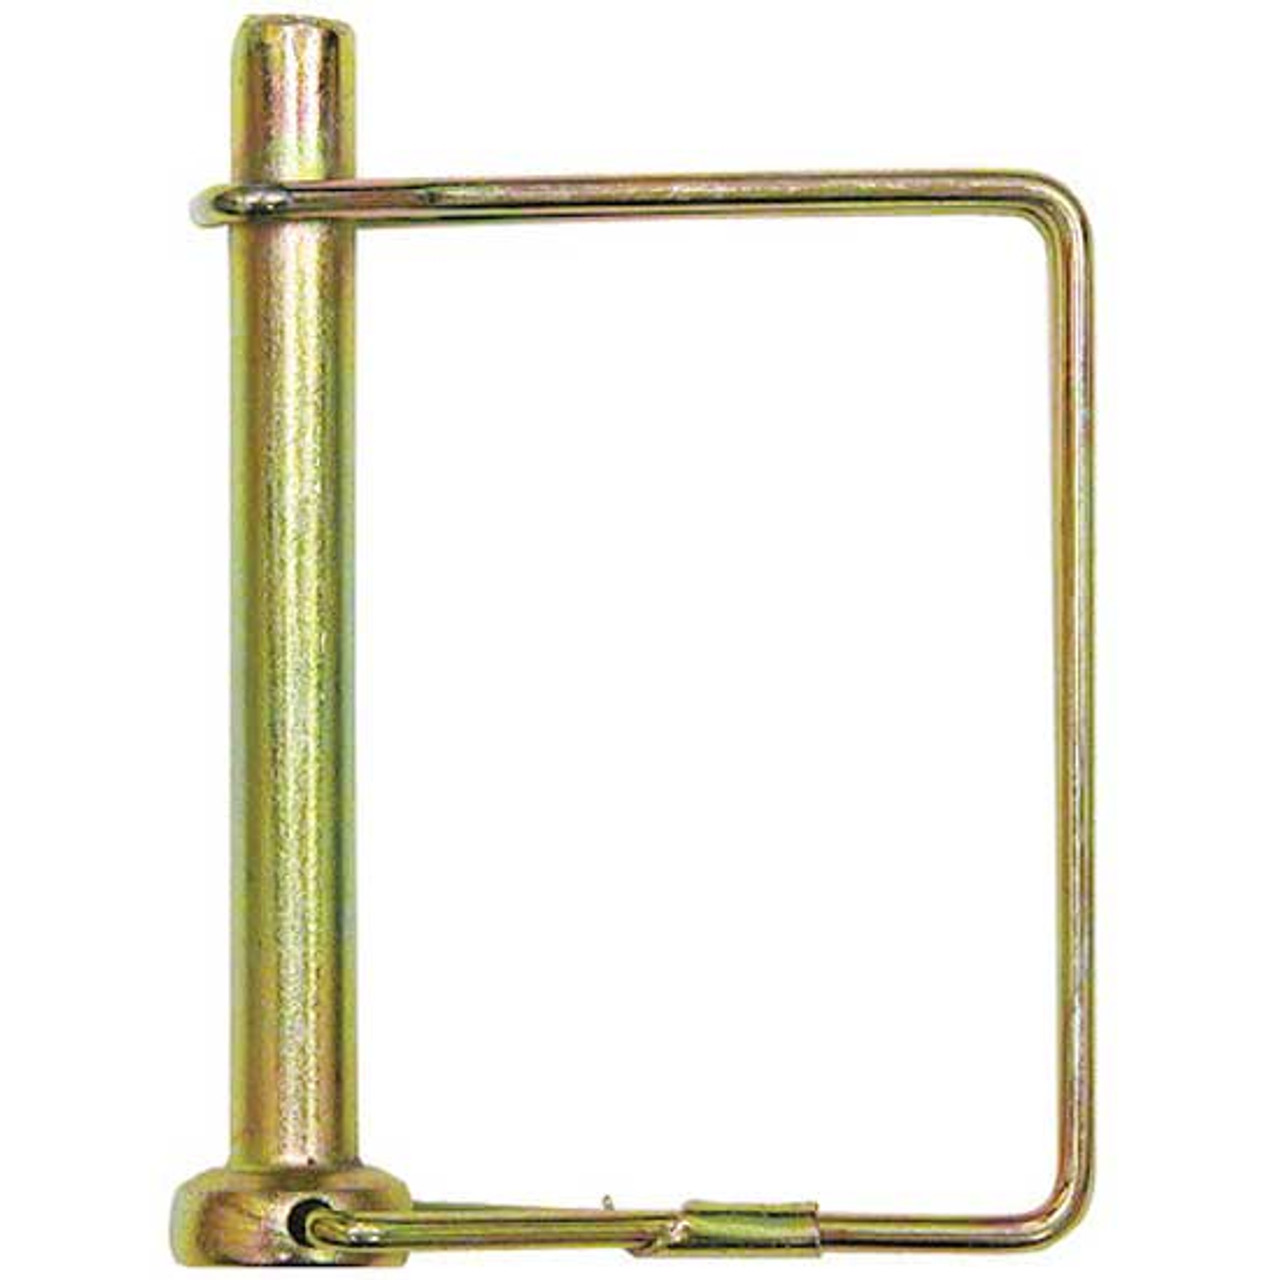 Safety pin, stainless steel and gold-plated brass, 2-3/8 inches